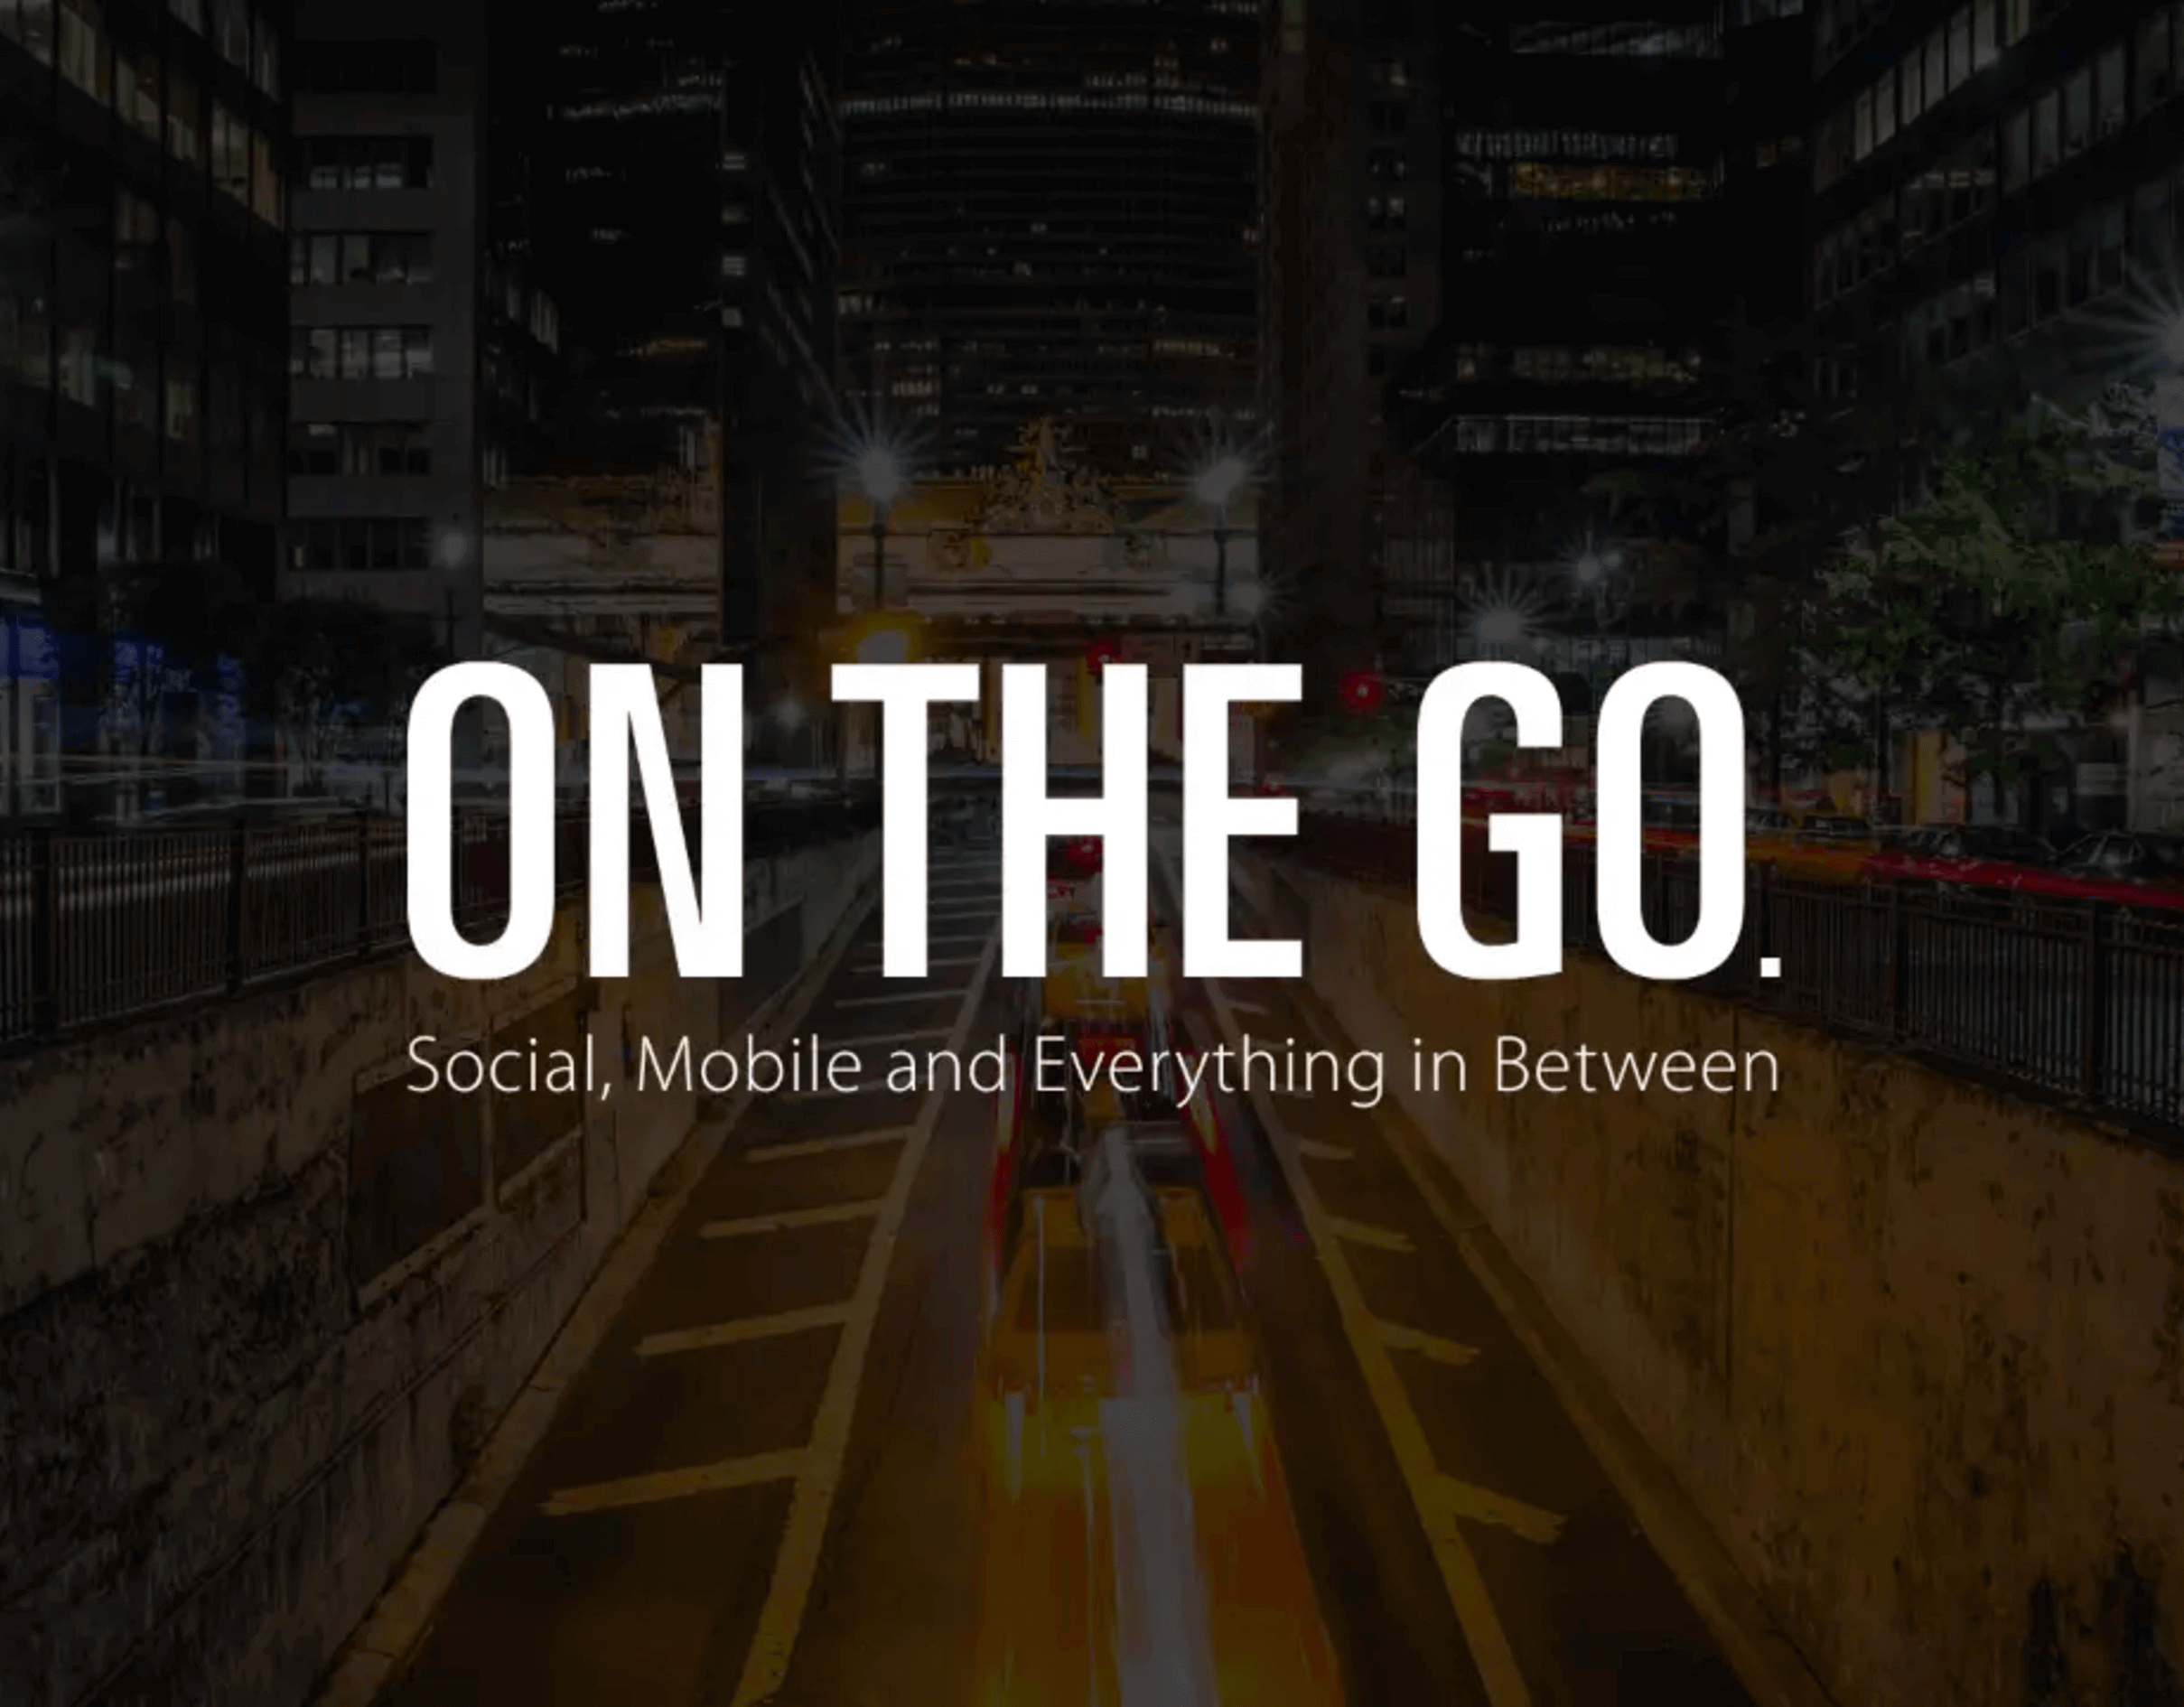 social, mobile and everything in between